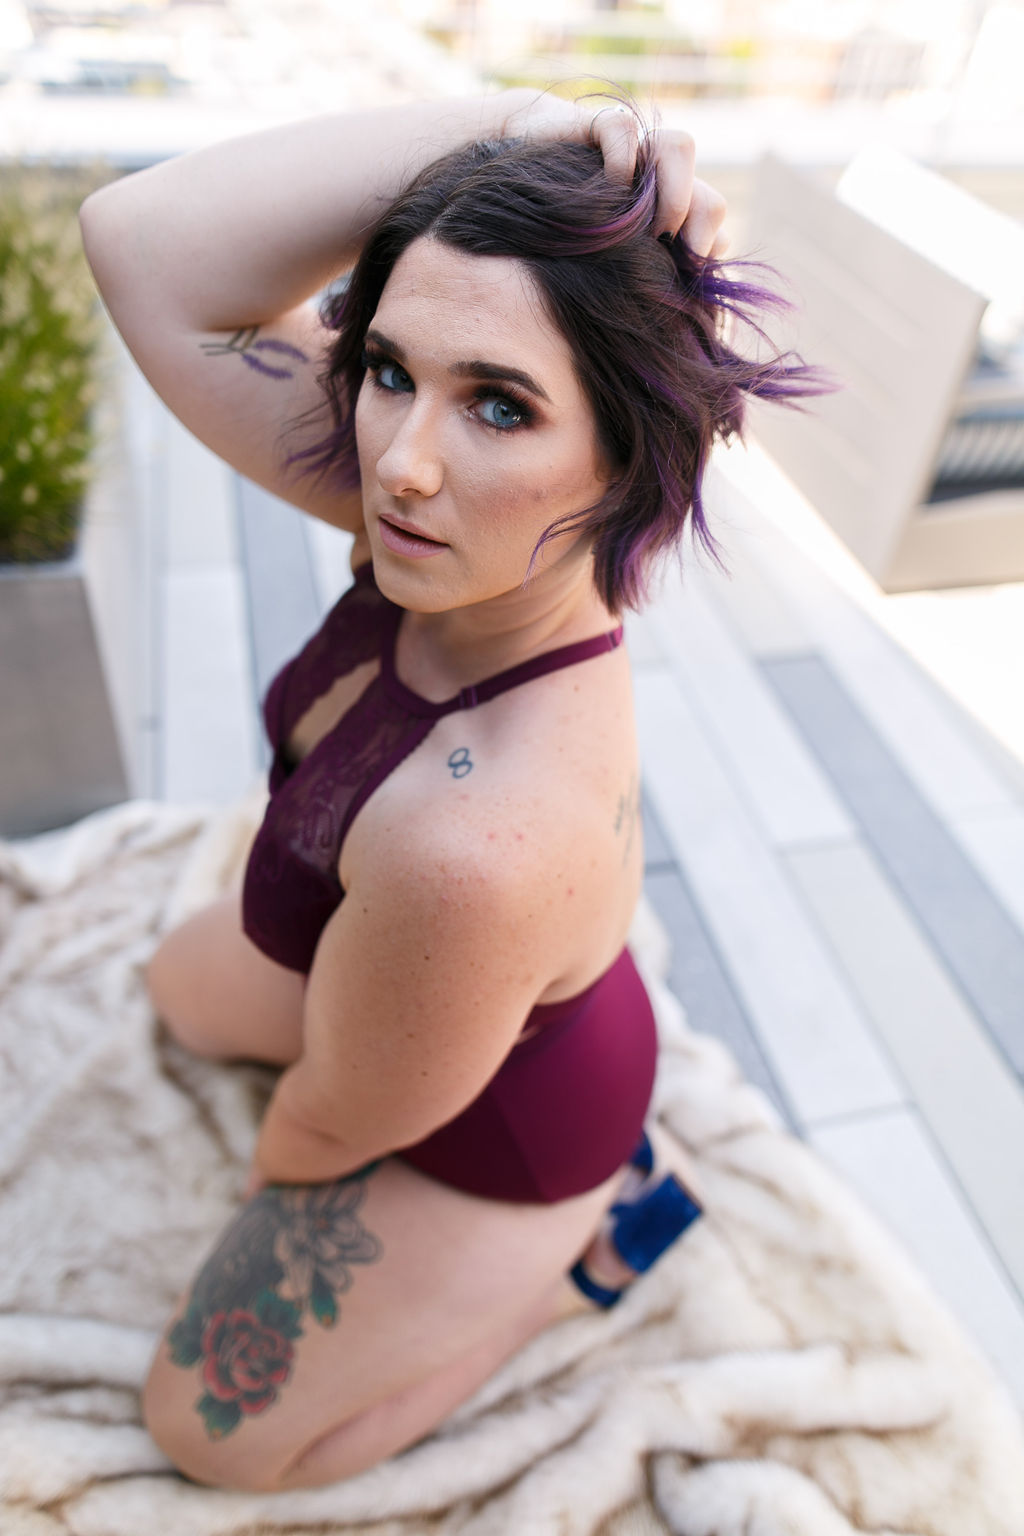 Philly Outdoor Rooftop Boudoir Session by Swiger Photography 21.jpg